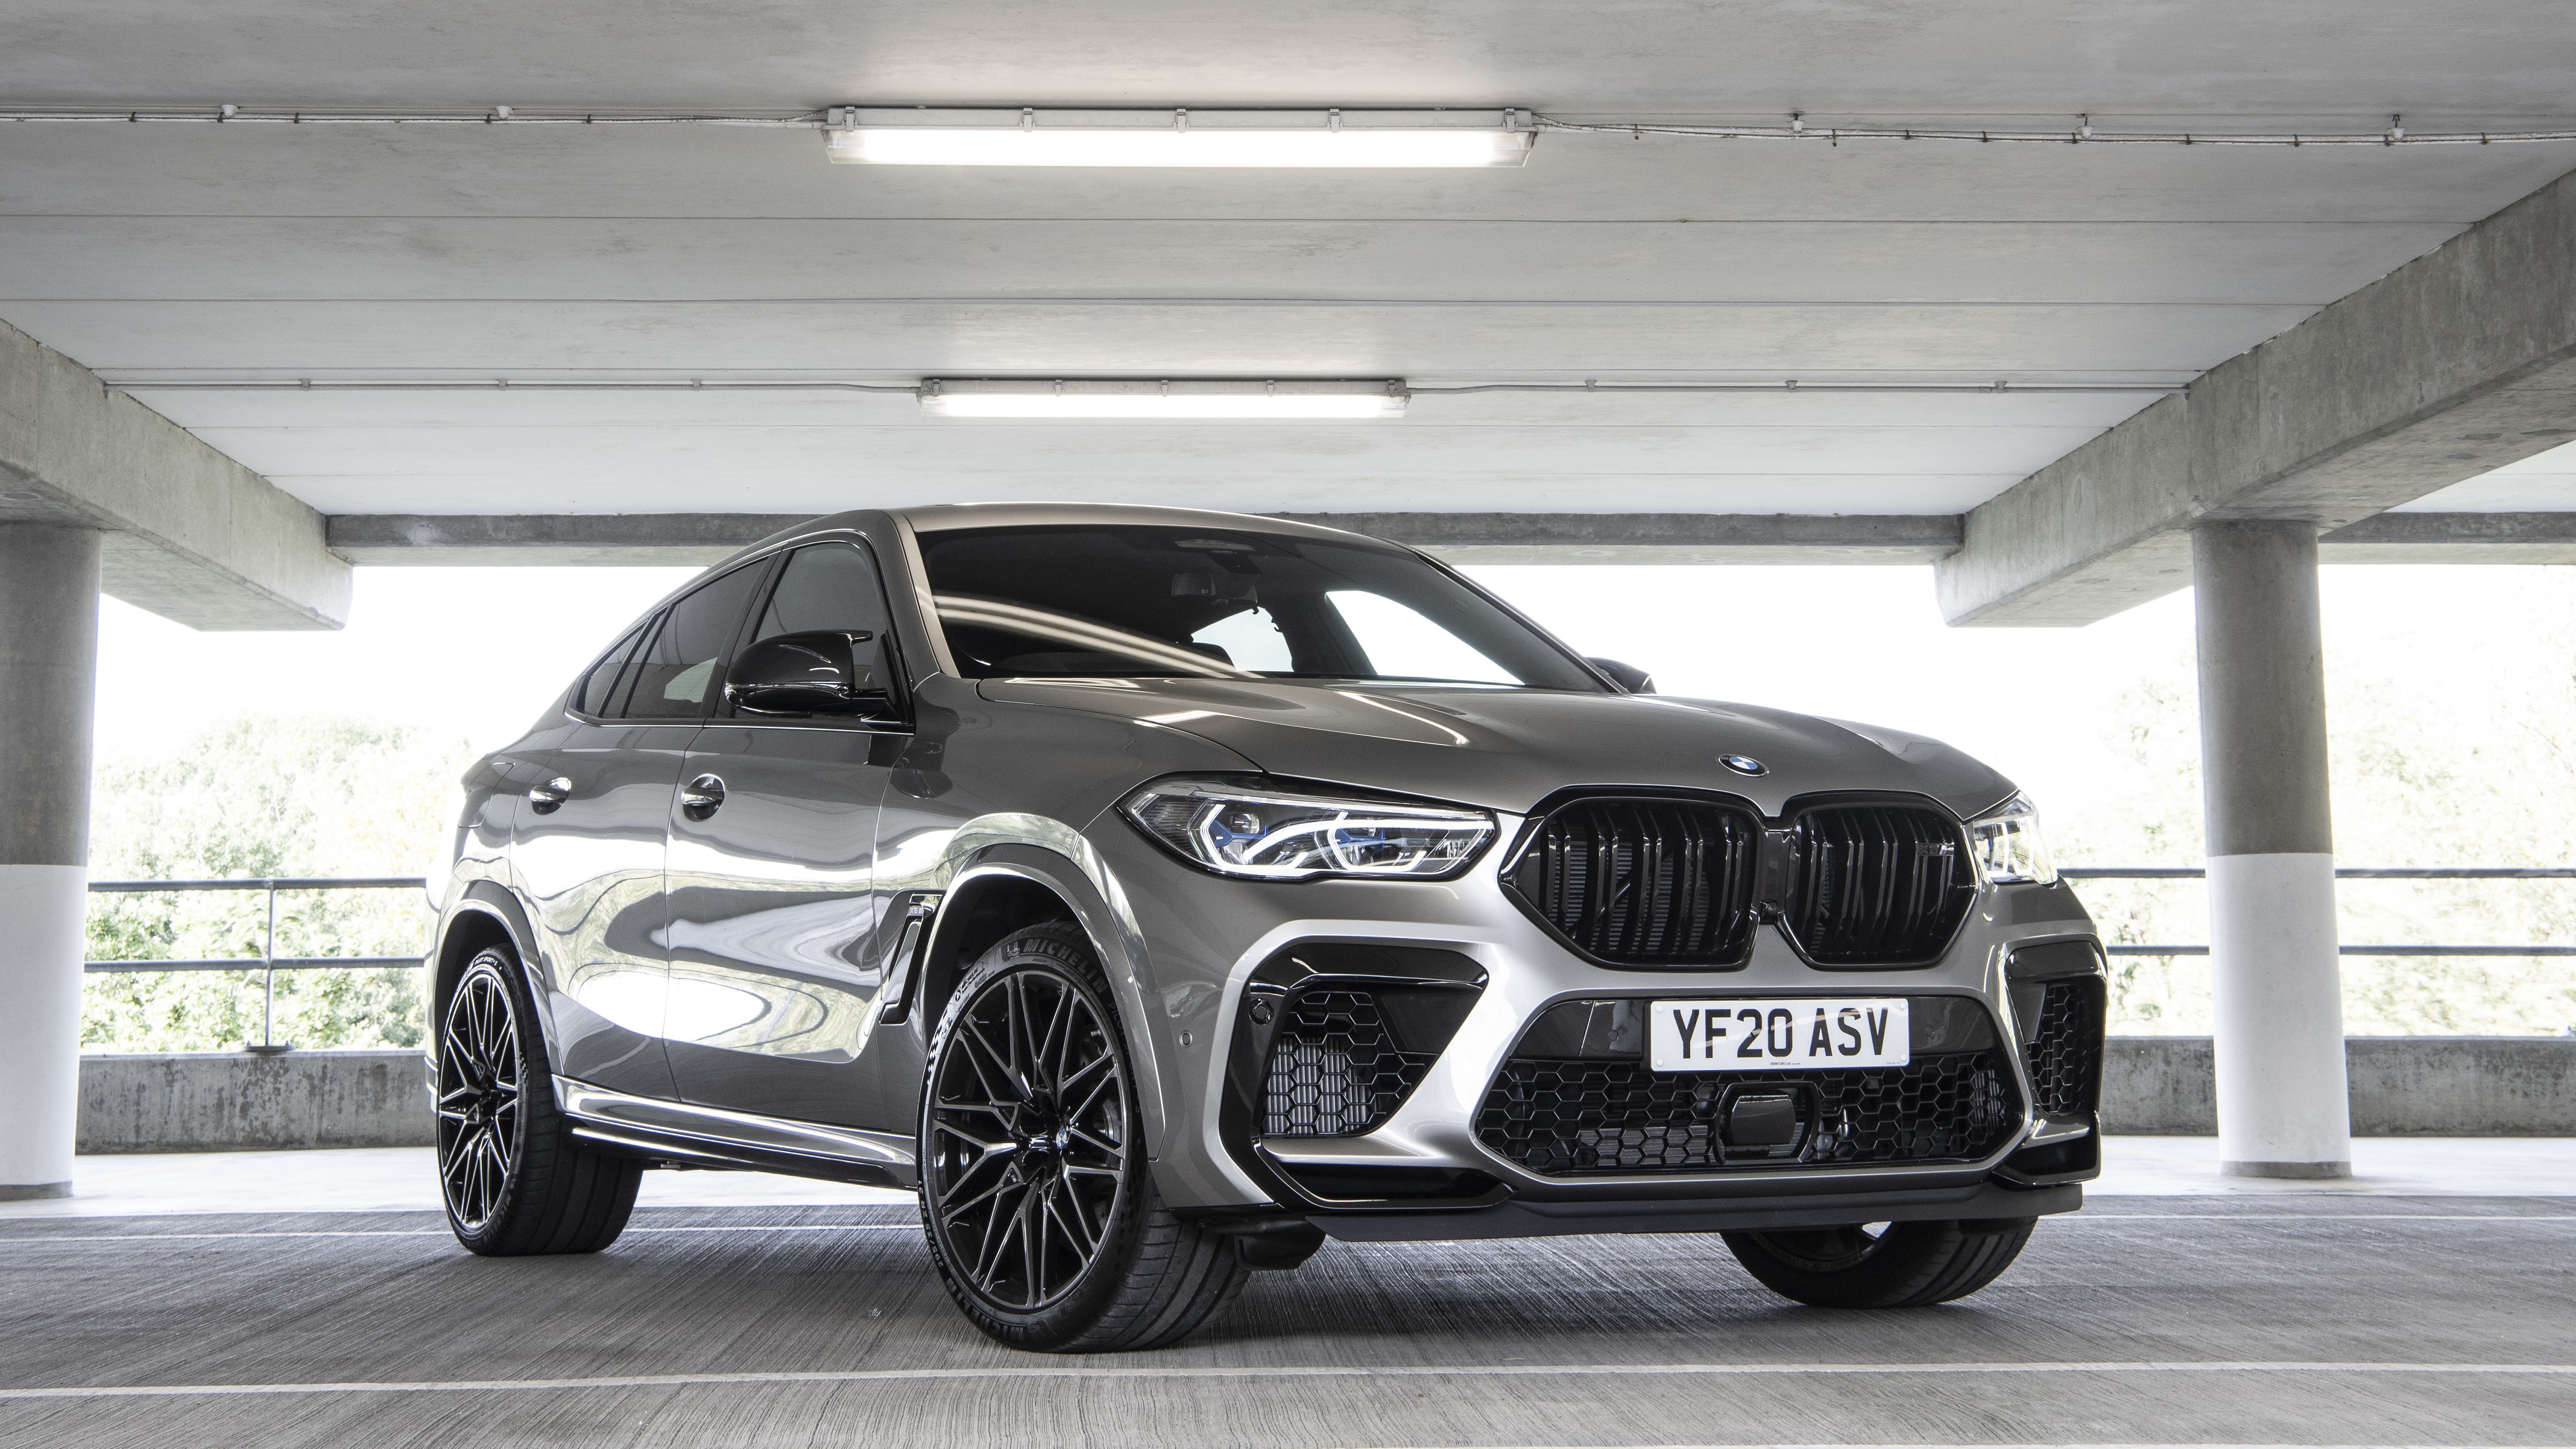 X6 competition. БМВ x6m 2021. BMW x6 m 2021. BMW x6m 2020. BMW x6m Competition 2021.